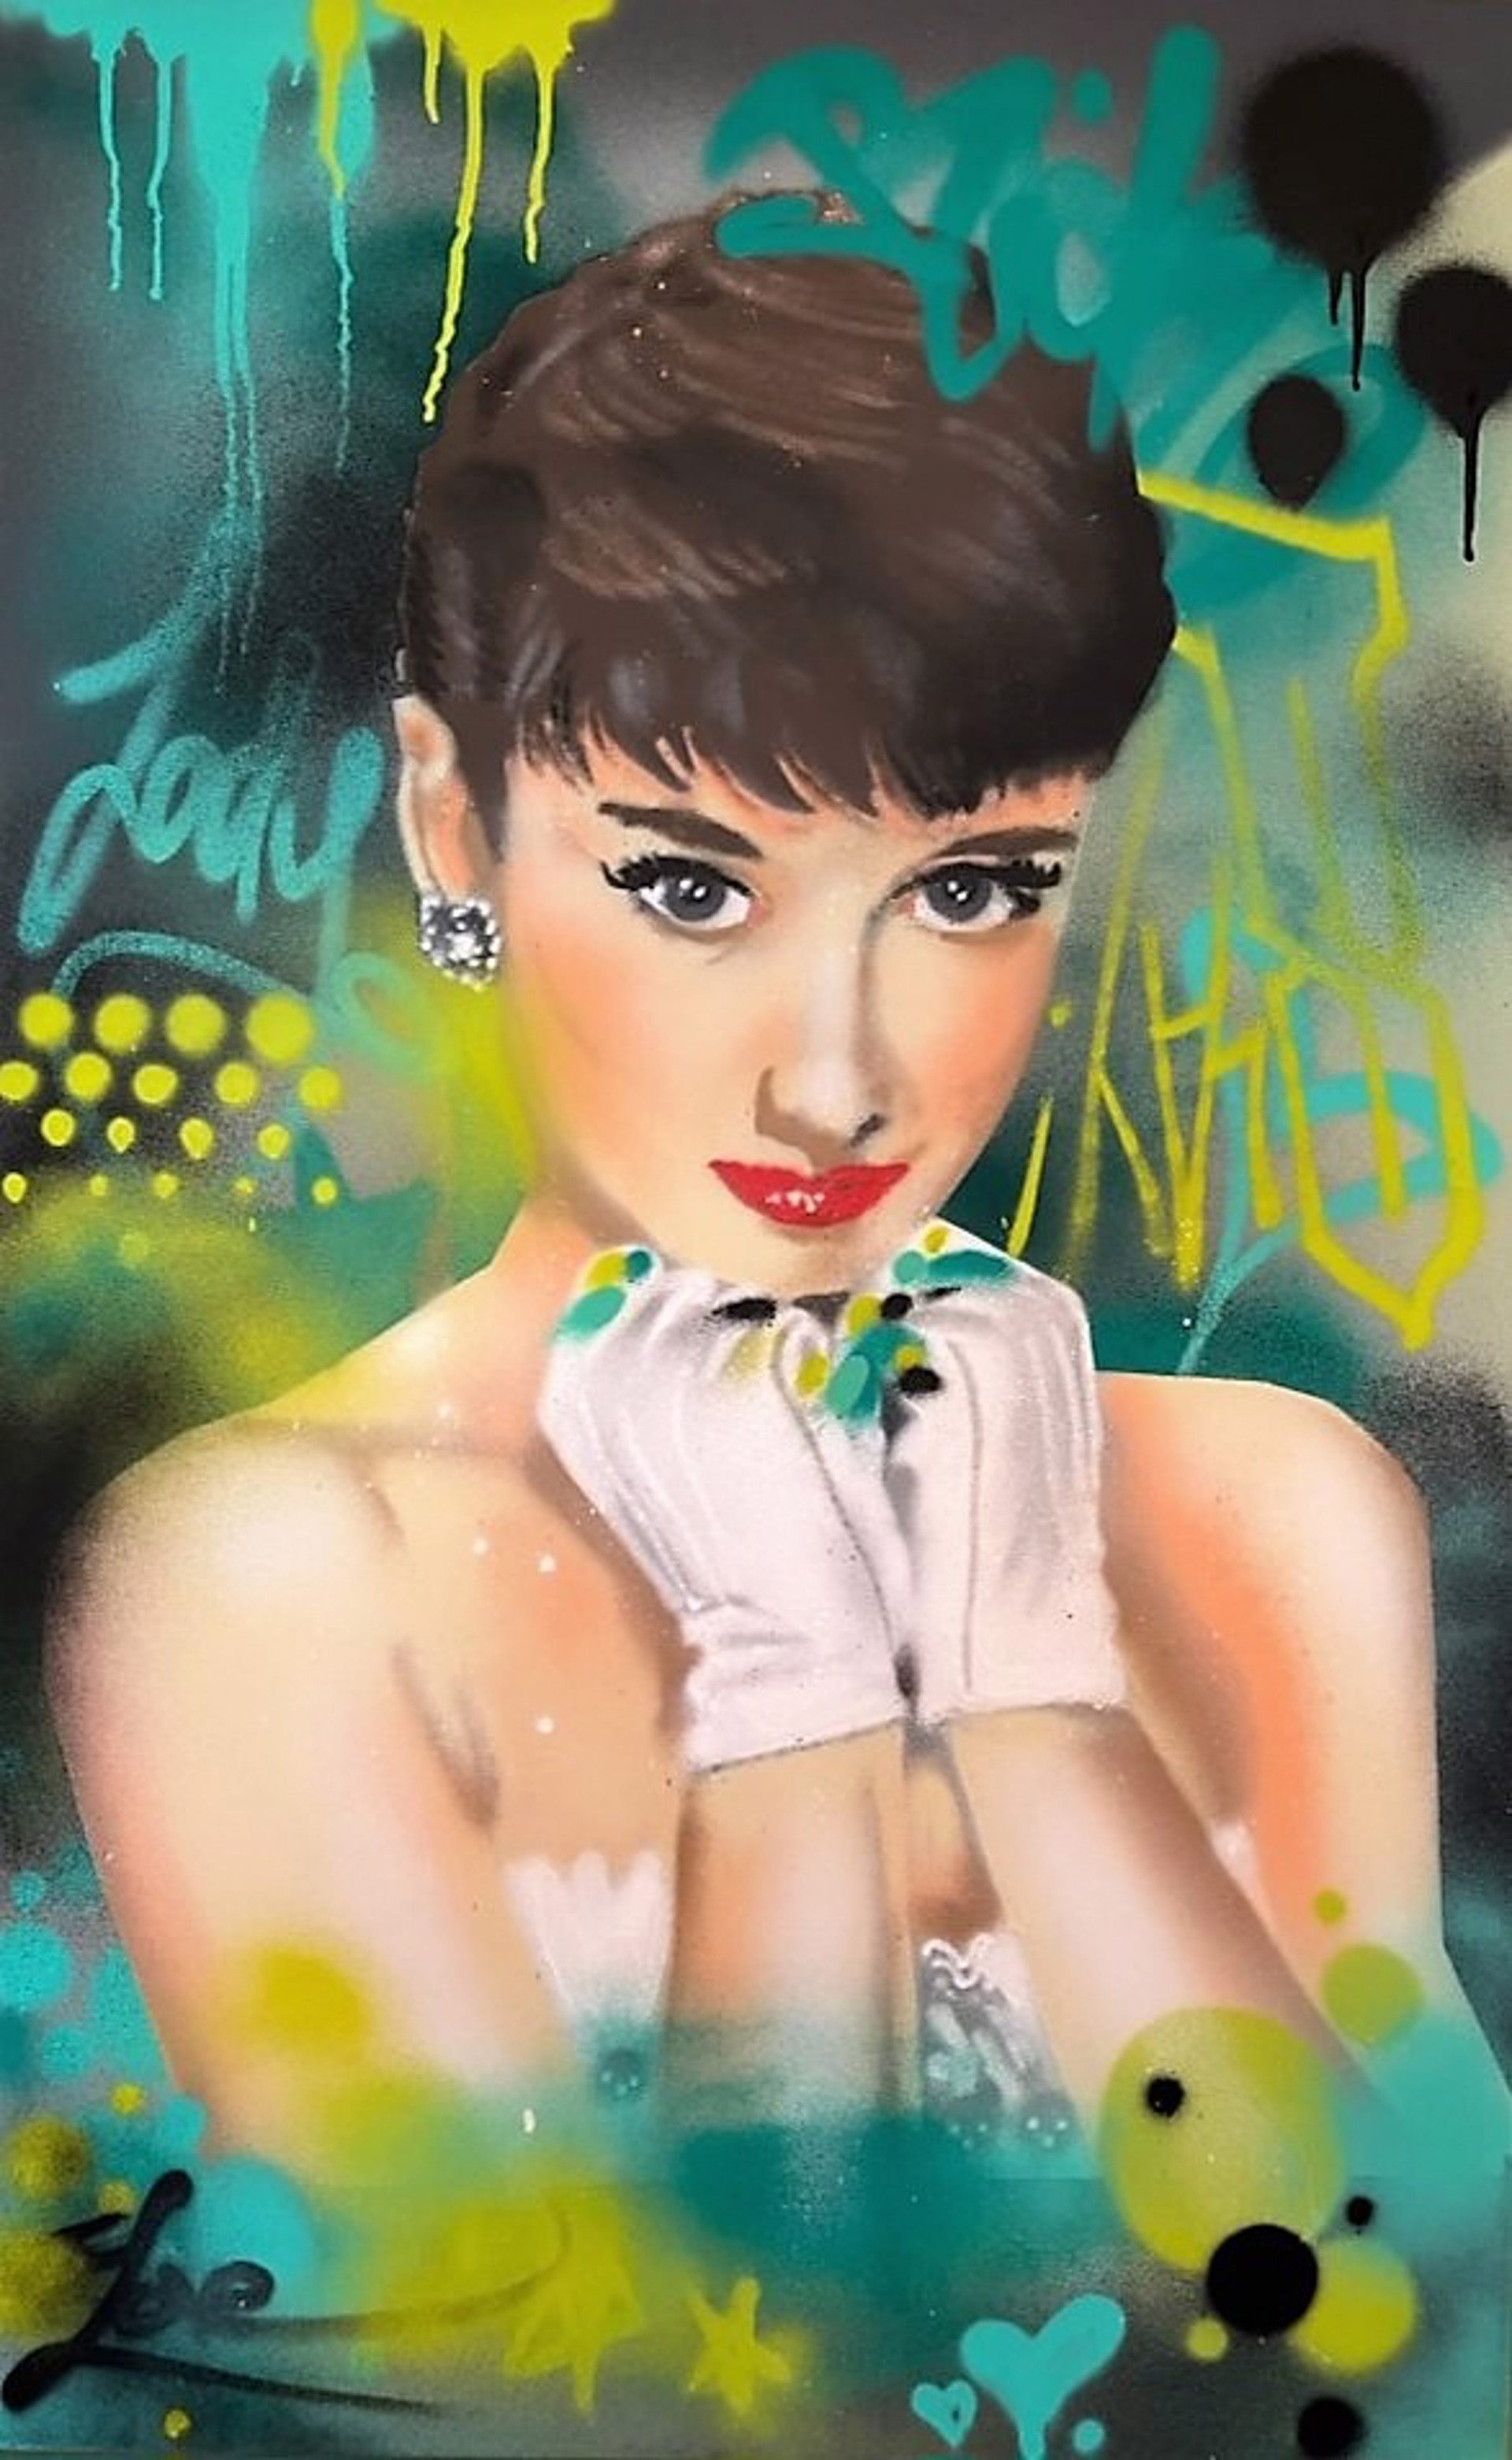 PEPBURN - Homage to Audrey Hepburn from the Hulton archive by MIKE RICH